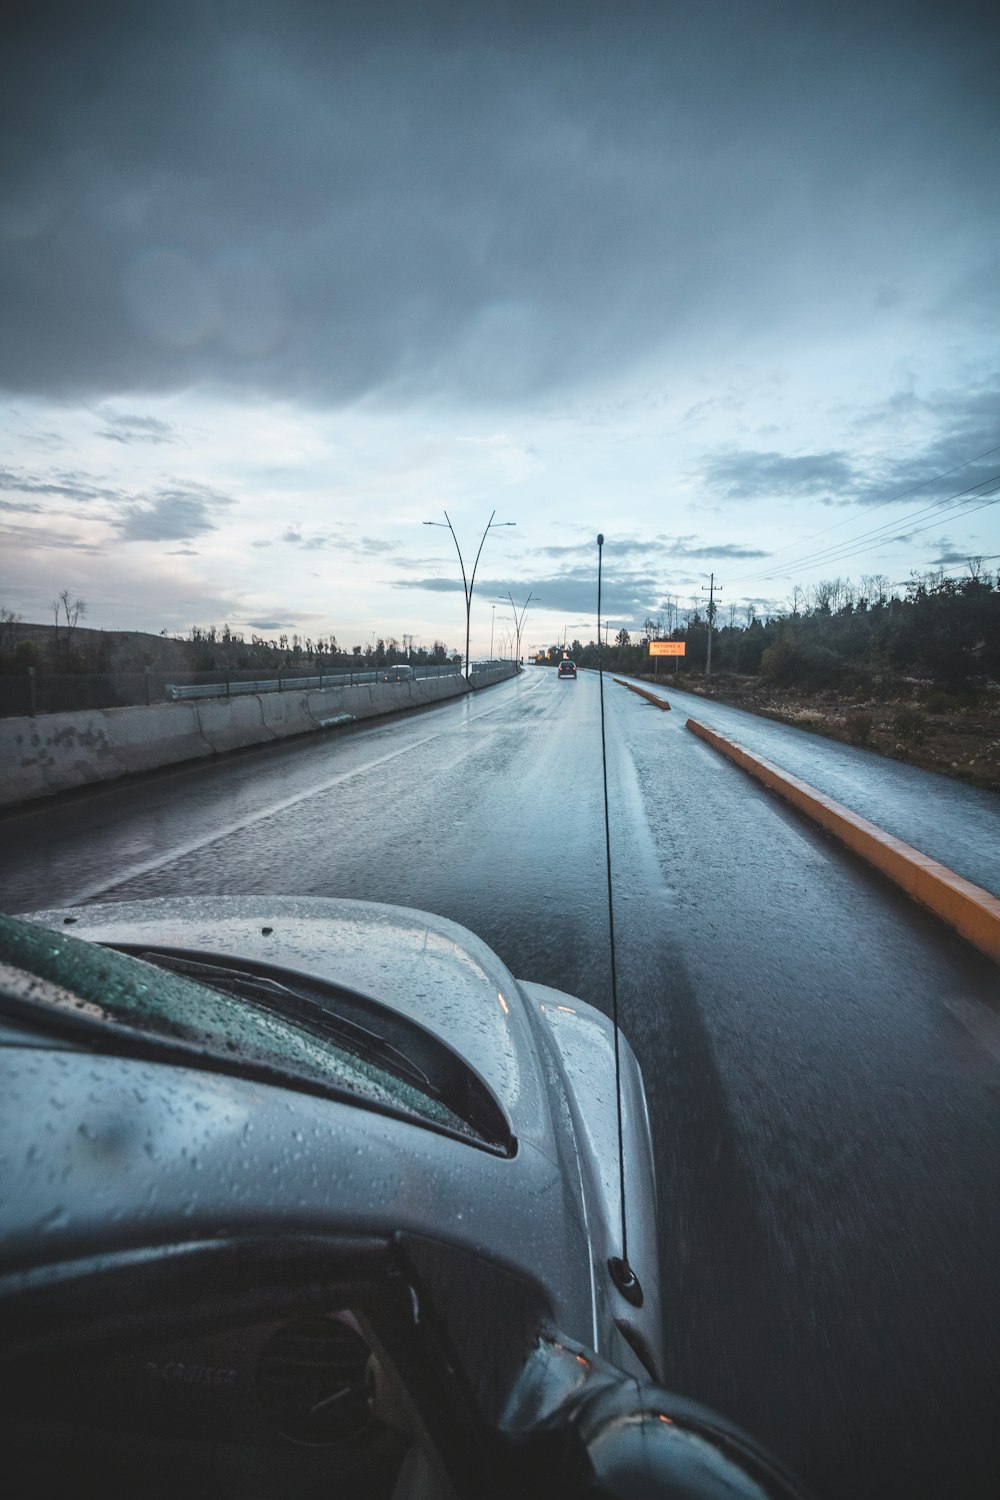 a car driving down a wet road under a cloudy sky